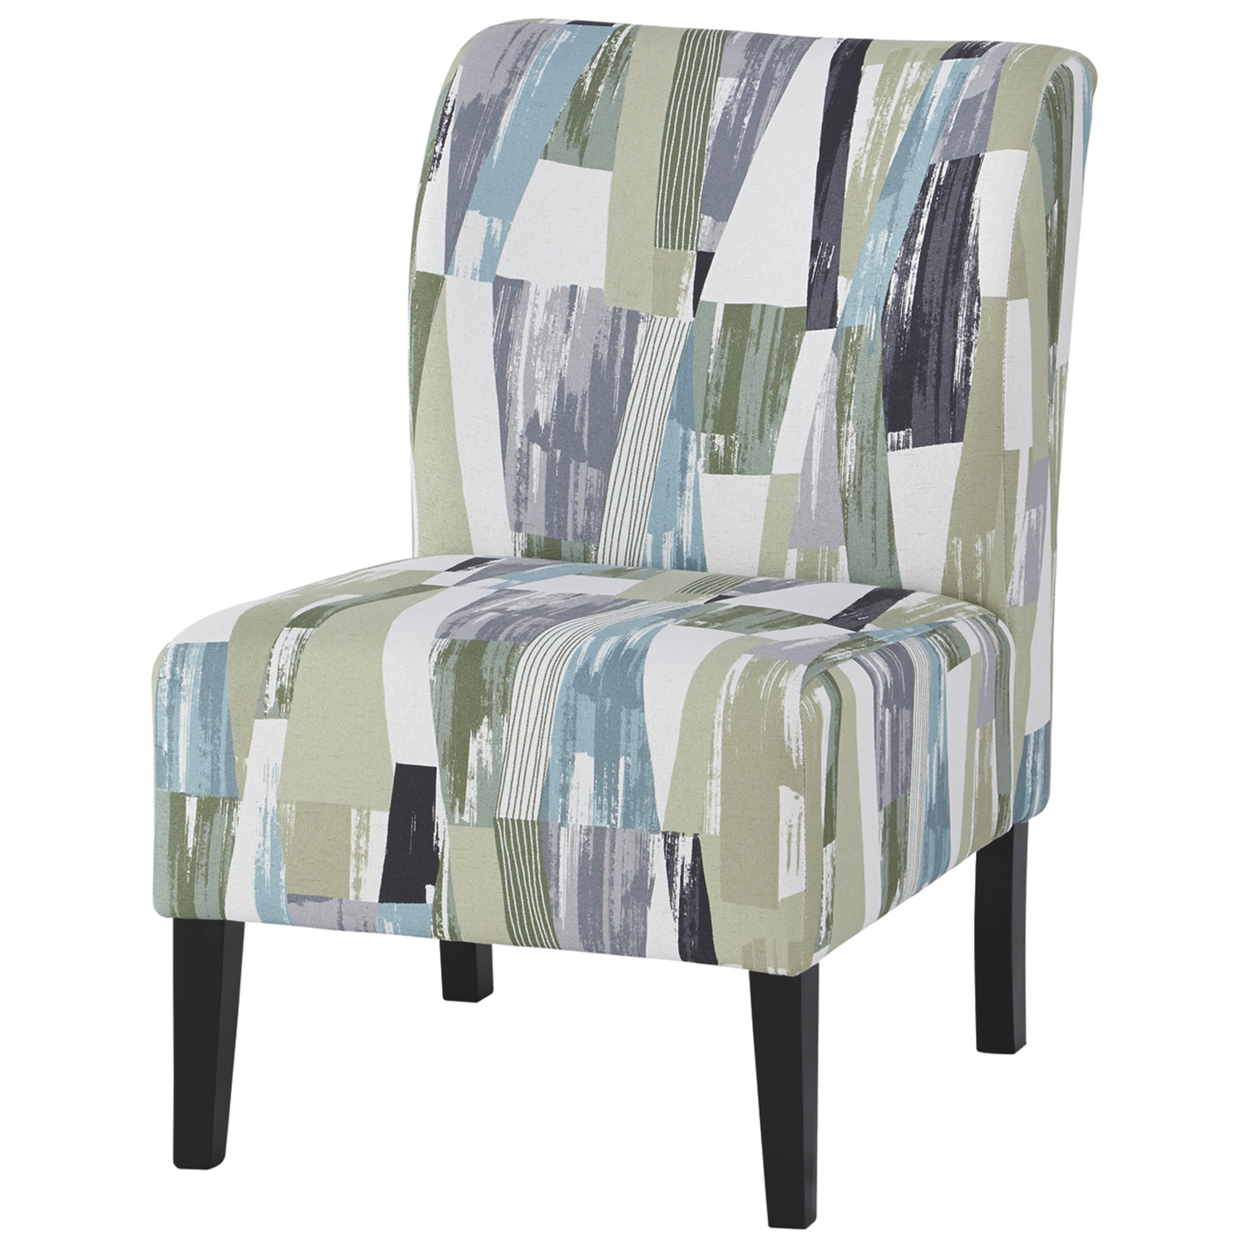 Wooden Armless Accent Chair With Patterned Fabric Upholstery, Multicolor- Saltoro Sherpi